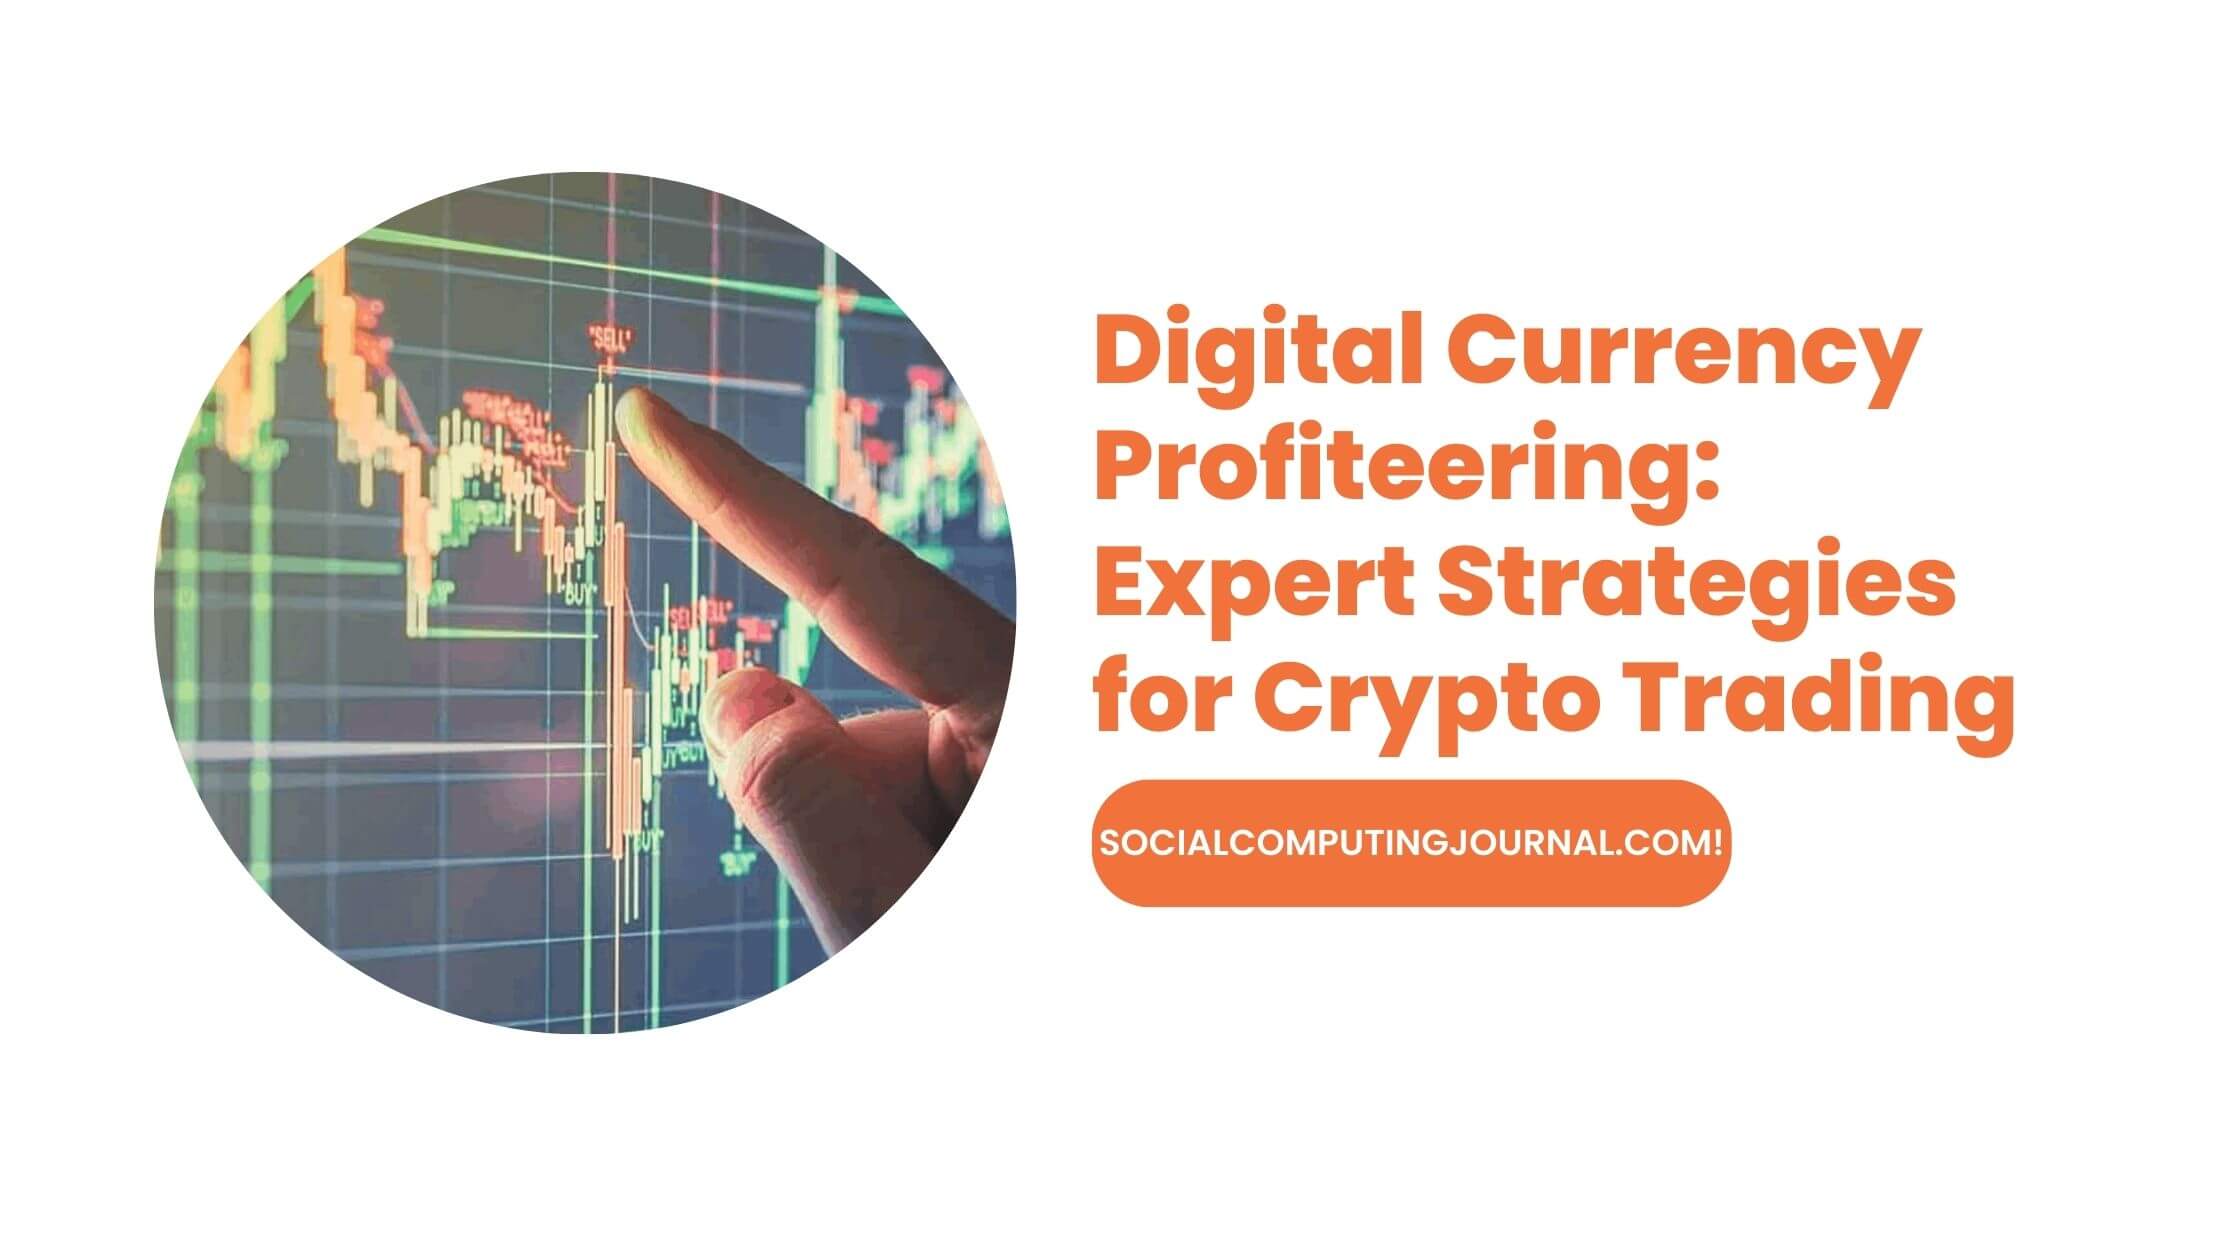 Digital Currency Profiteering Expert Strategies for Crypto Trading